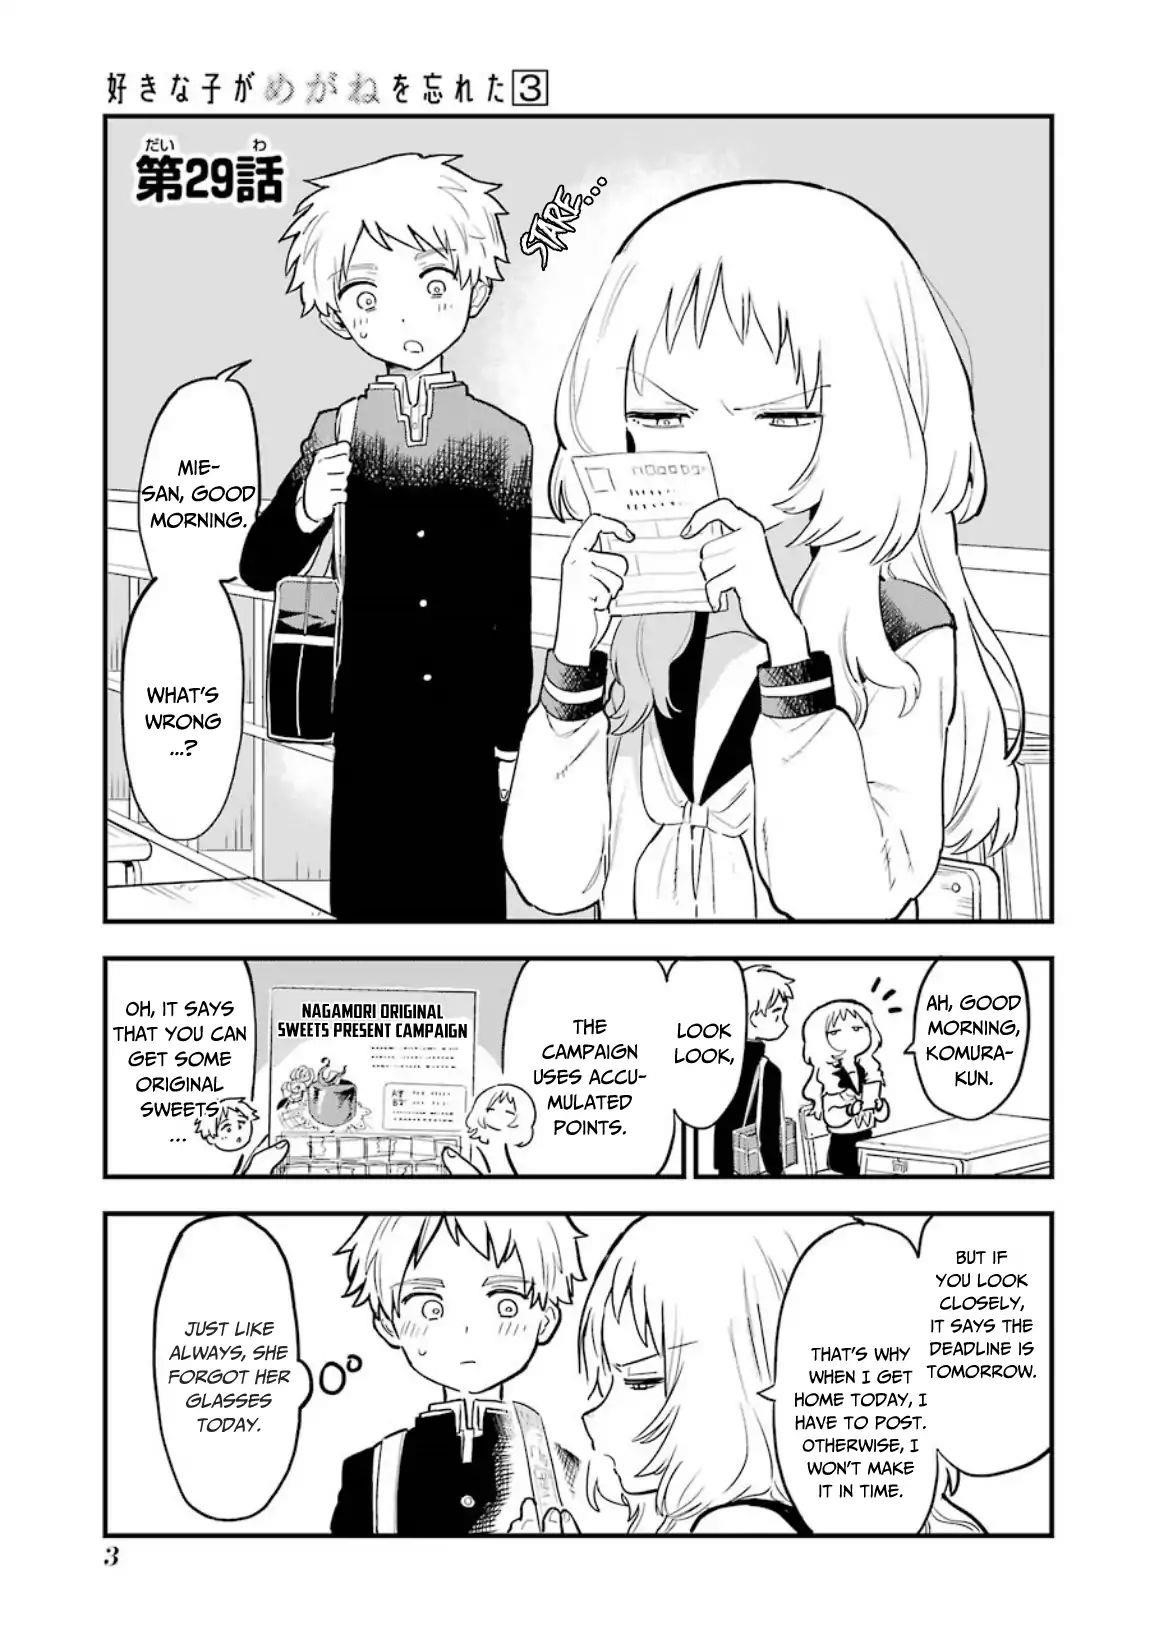 The Girl I Like Forgot Her Glasses Chapter 29 - Page 6